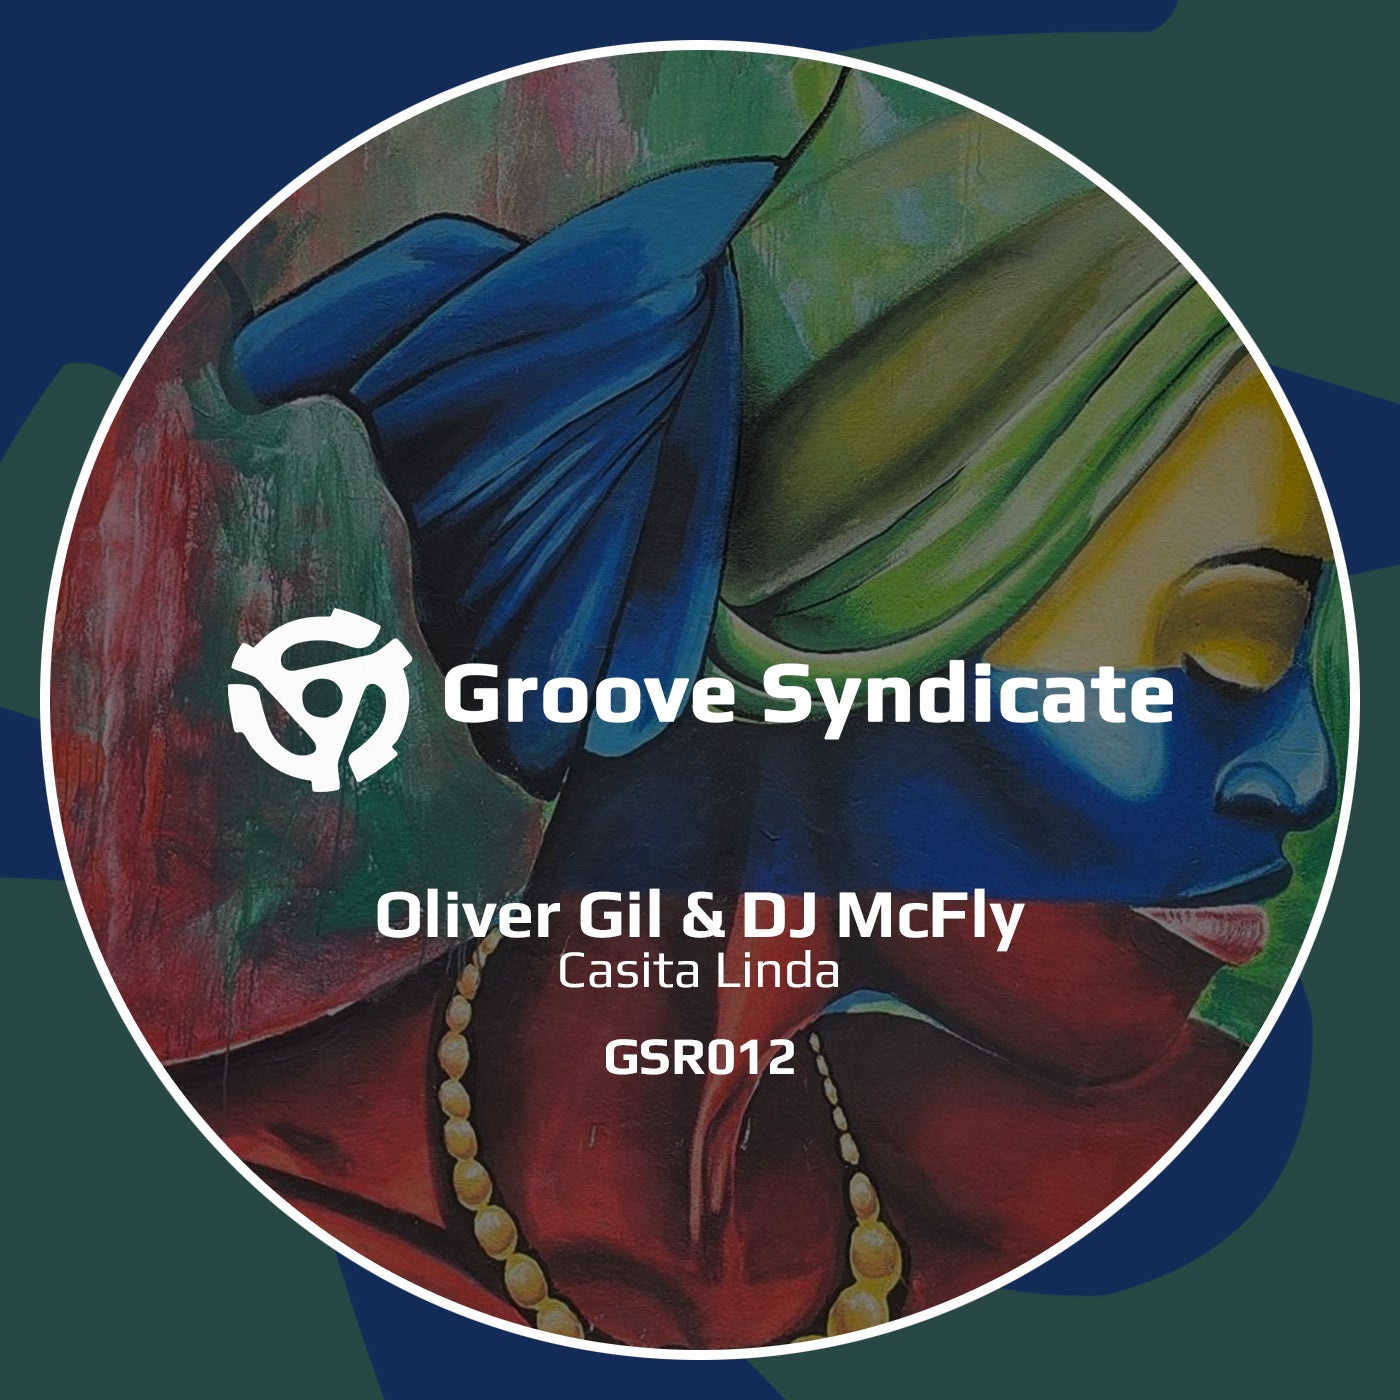 Oliver Gil & DJ McFly - Casita Linda on Groove Syndicate Records